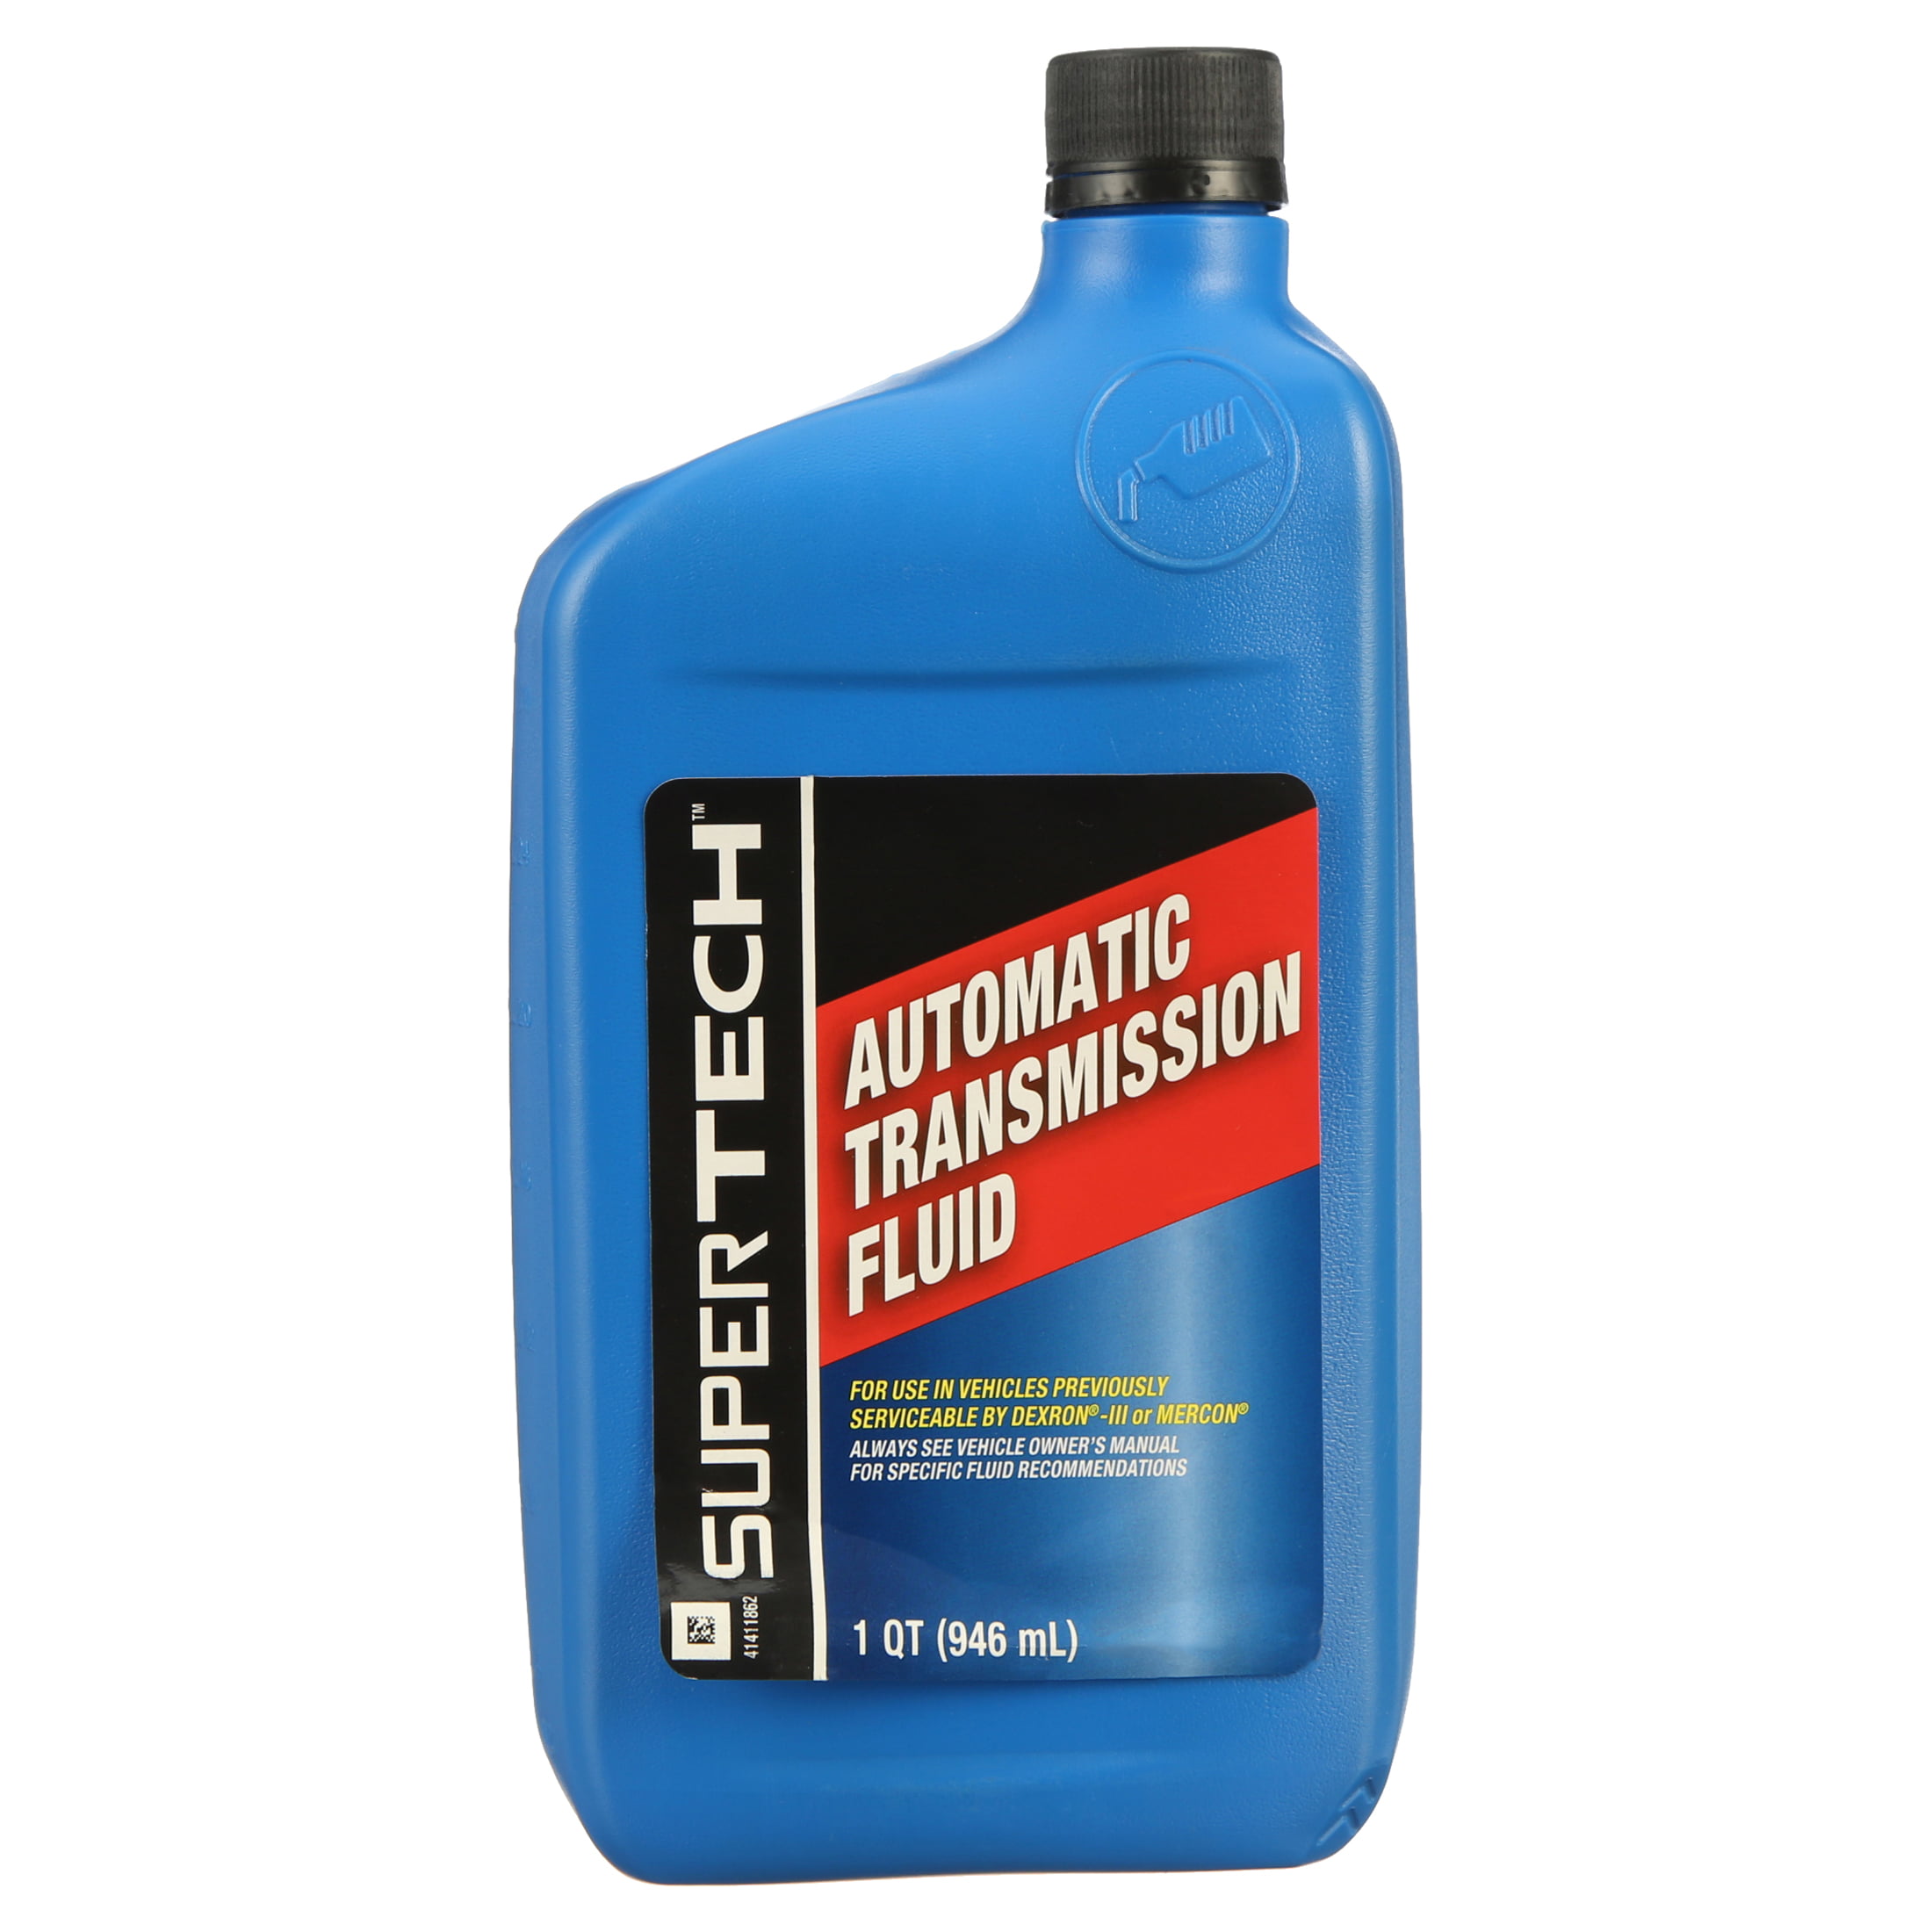 SuperTech ATF Best? Let's find out! ACDelco vs SuperTech, Mobil